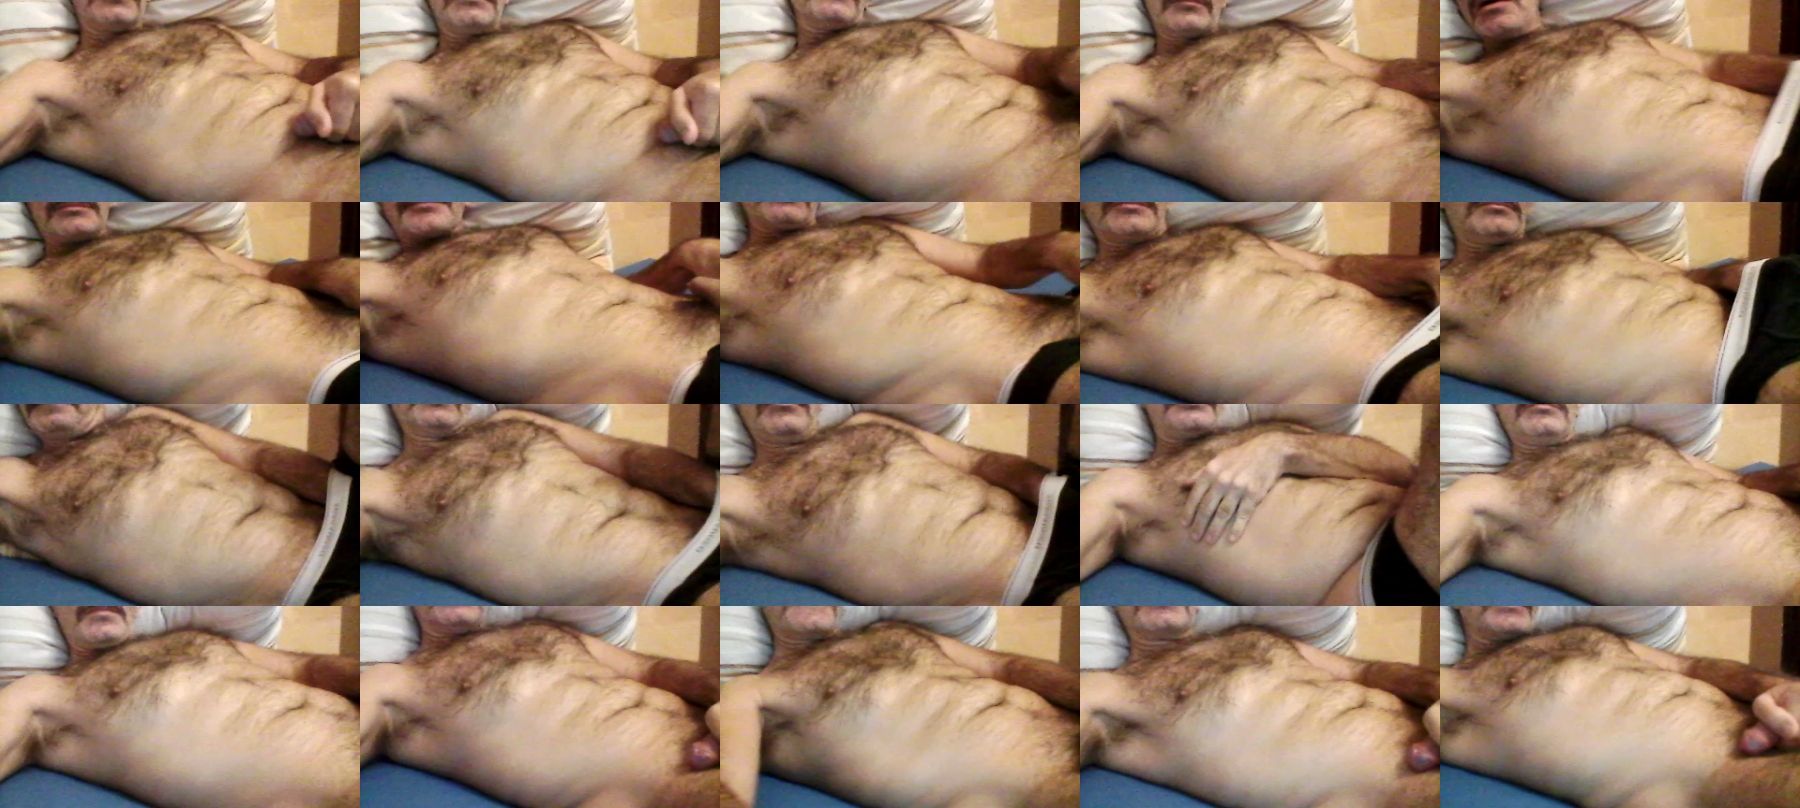 johnguy32  07-12-2021 Recorded Video Topless